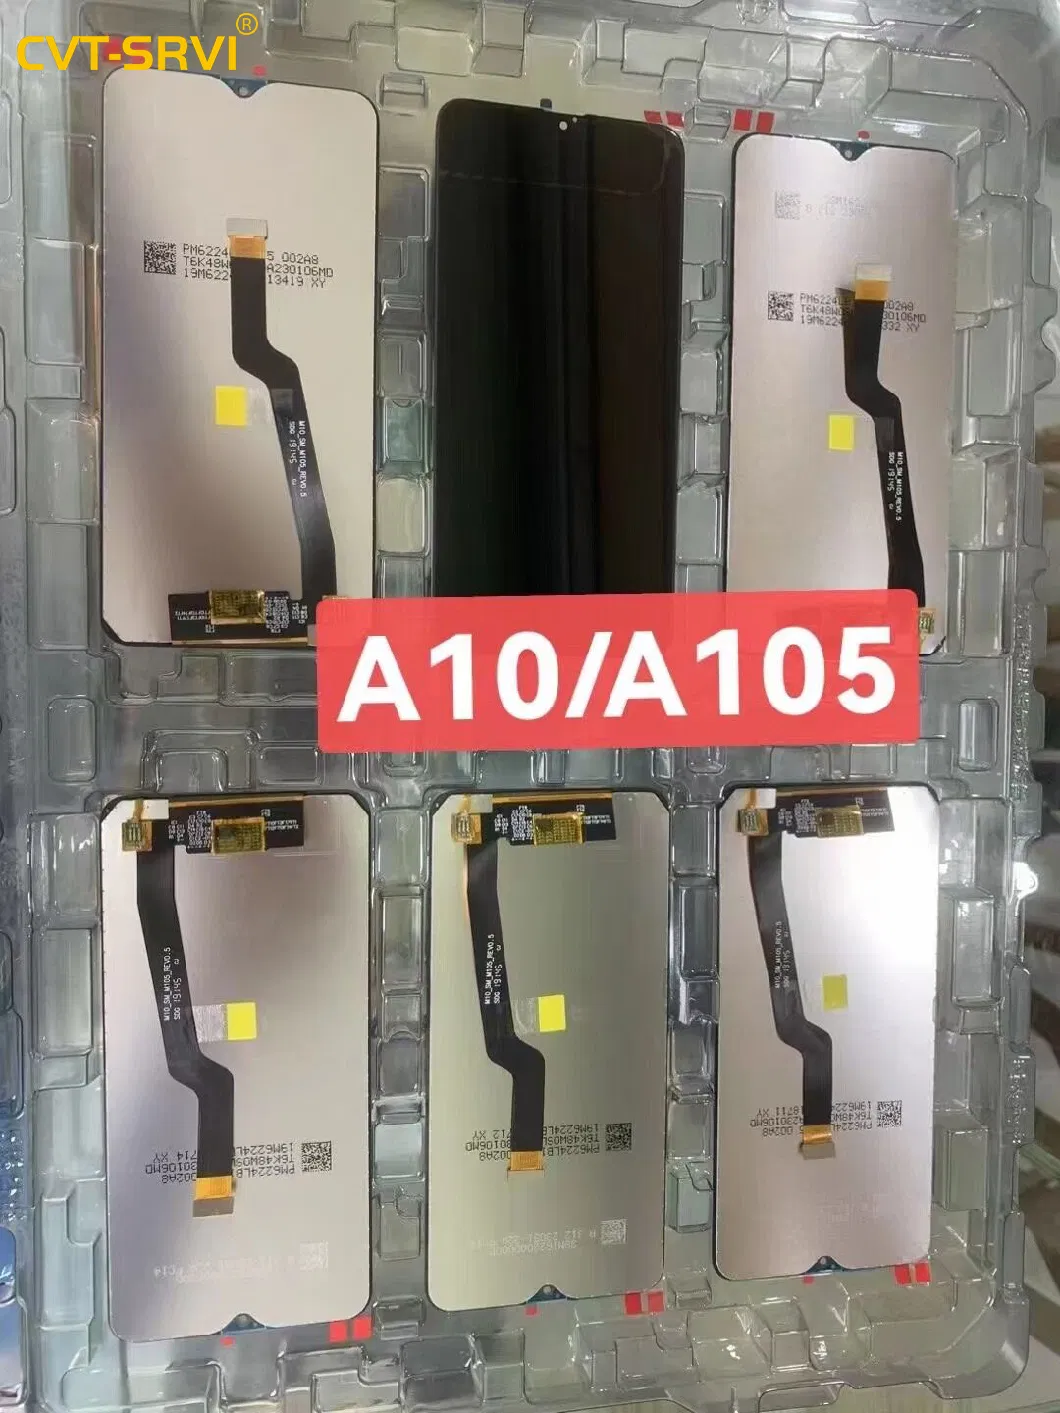 OEM High Quality Mobile Phone Screen CVT Original LCD Touch Screen for Samsung A03 Core Sm-A032/Ds LCD Replacement display